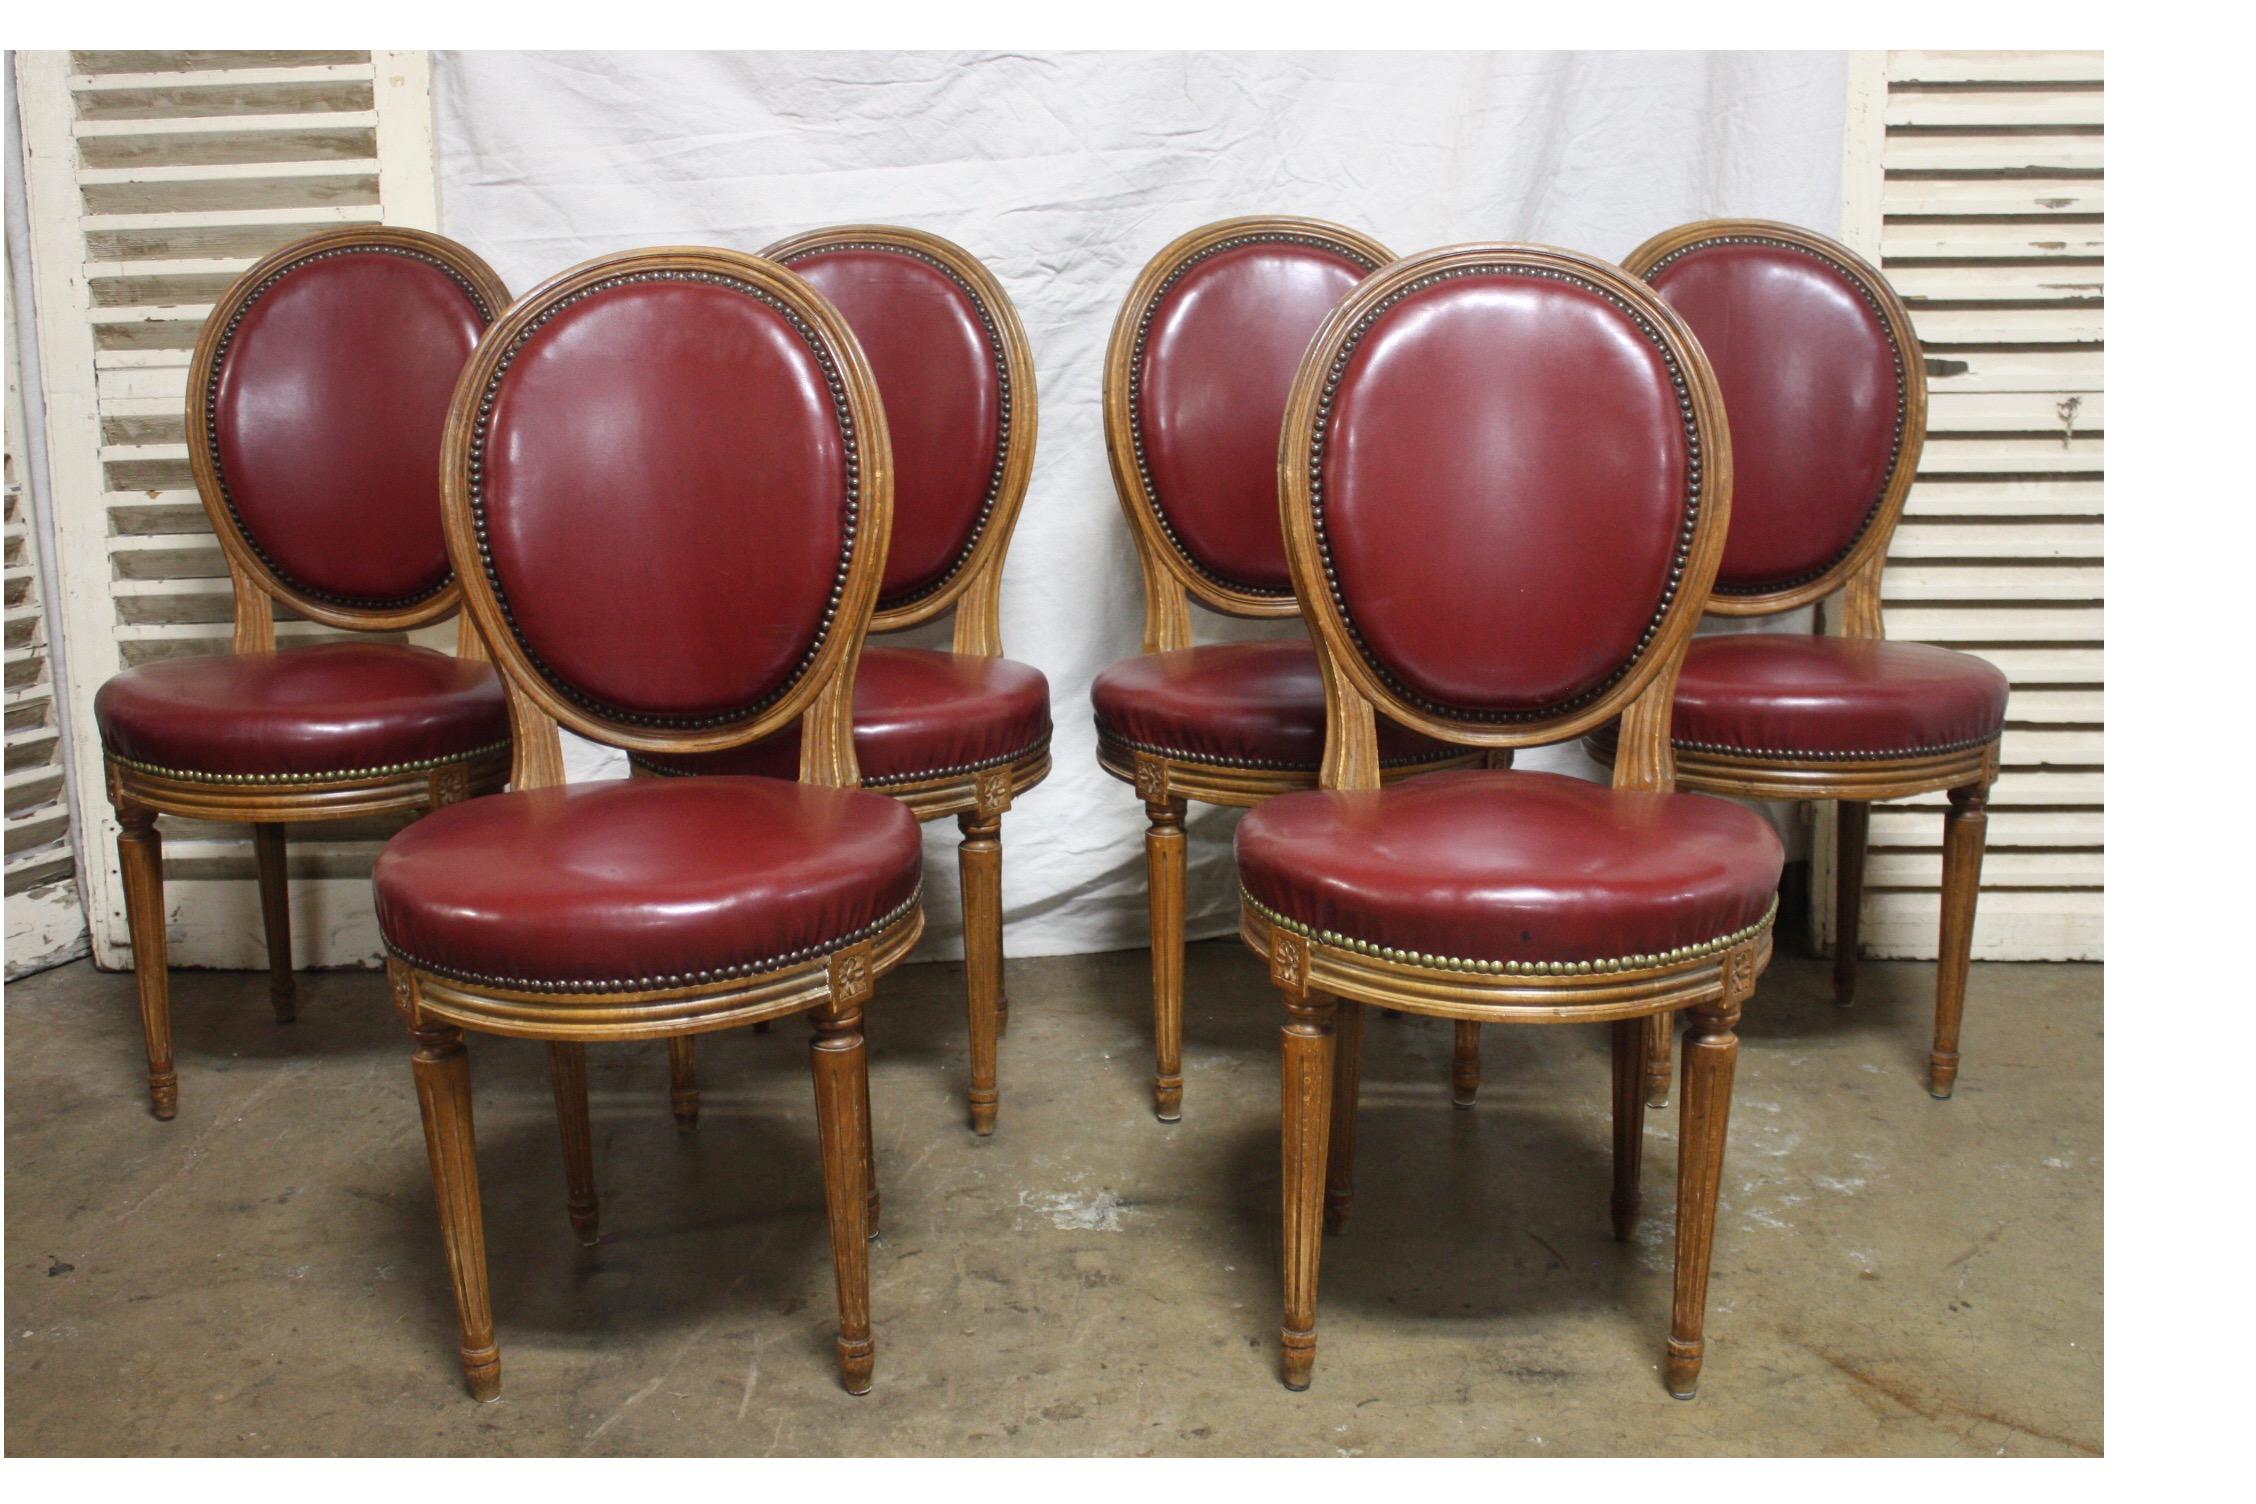 French 19th century set of 6 dining chairs.